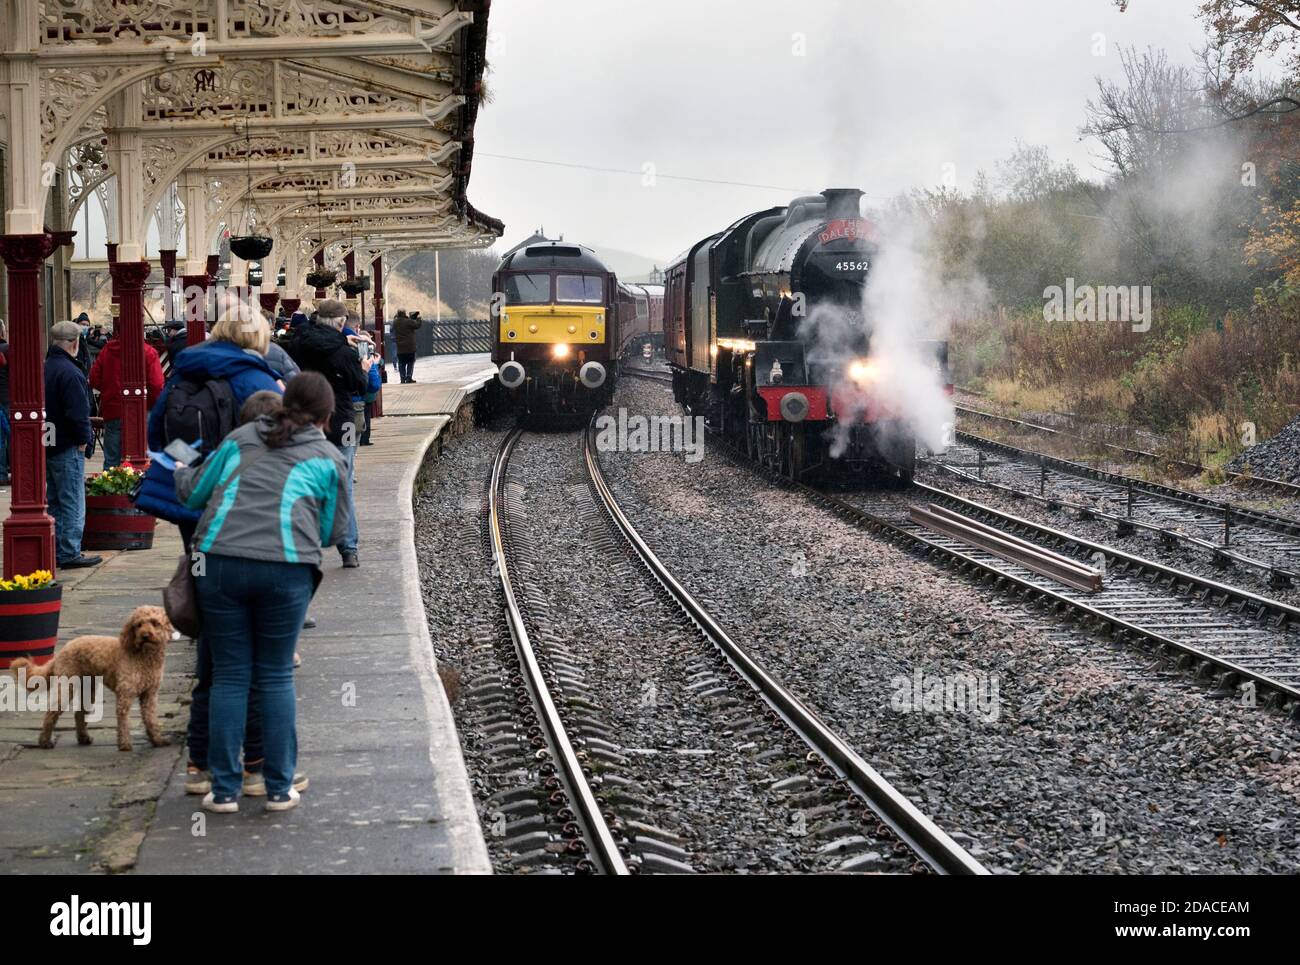 Hellifield Station, North Yorkshire. Crowds watch as steam locomotive 'Alberta' waits to take over a special train from a diesel locomotive. Stock Photo